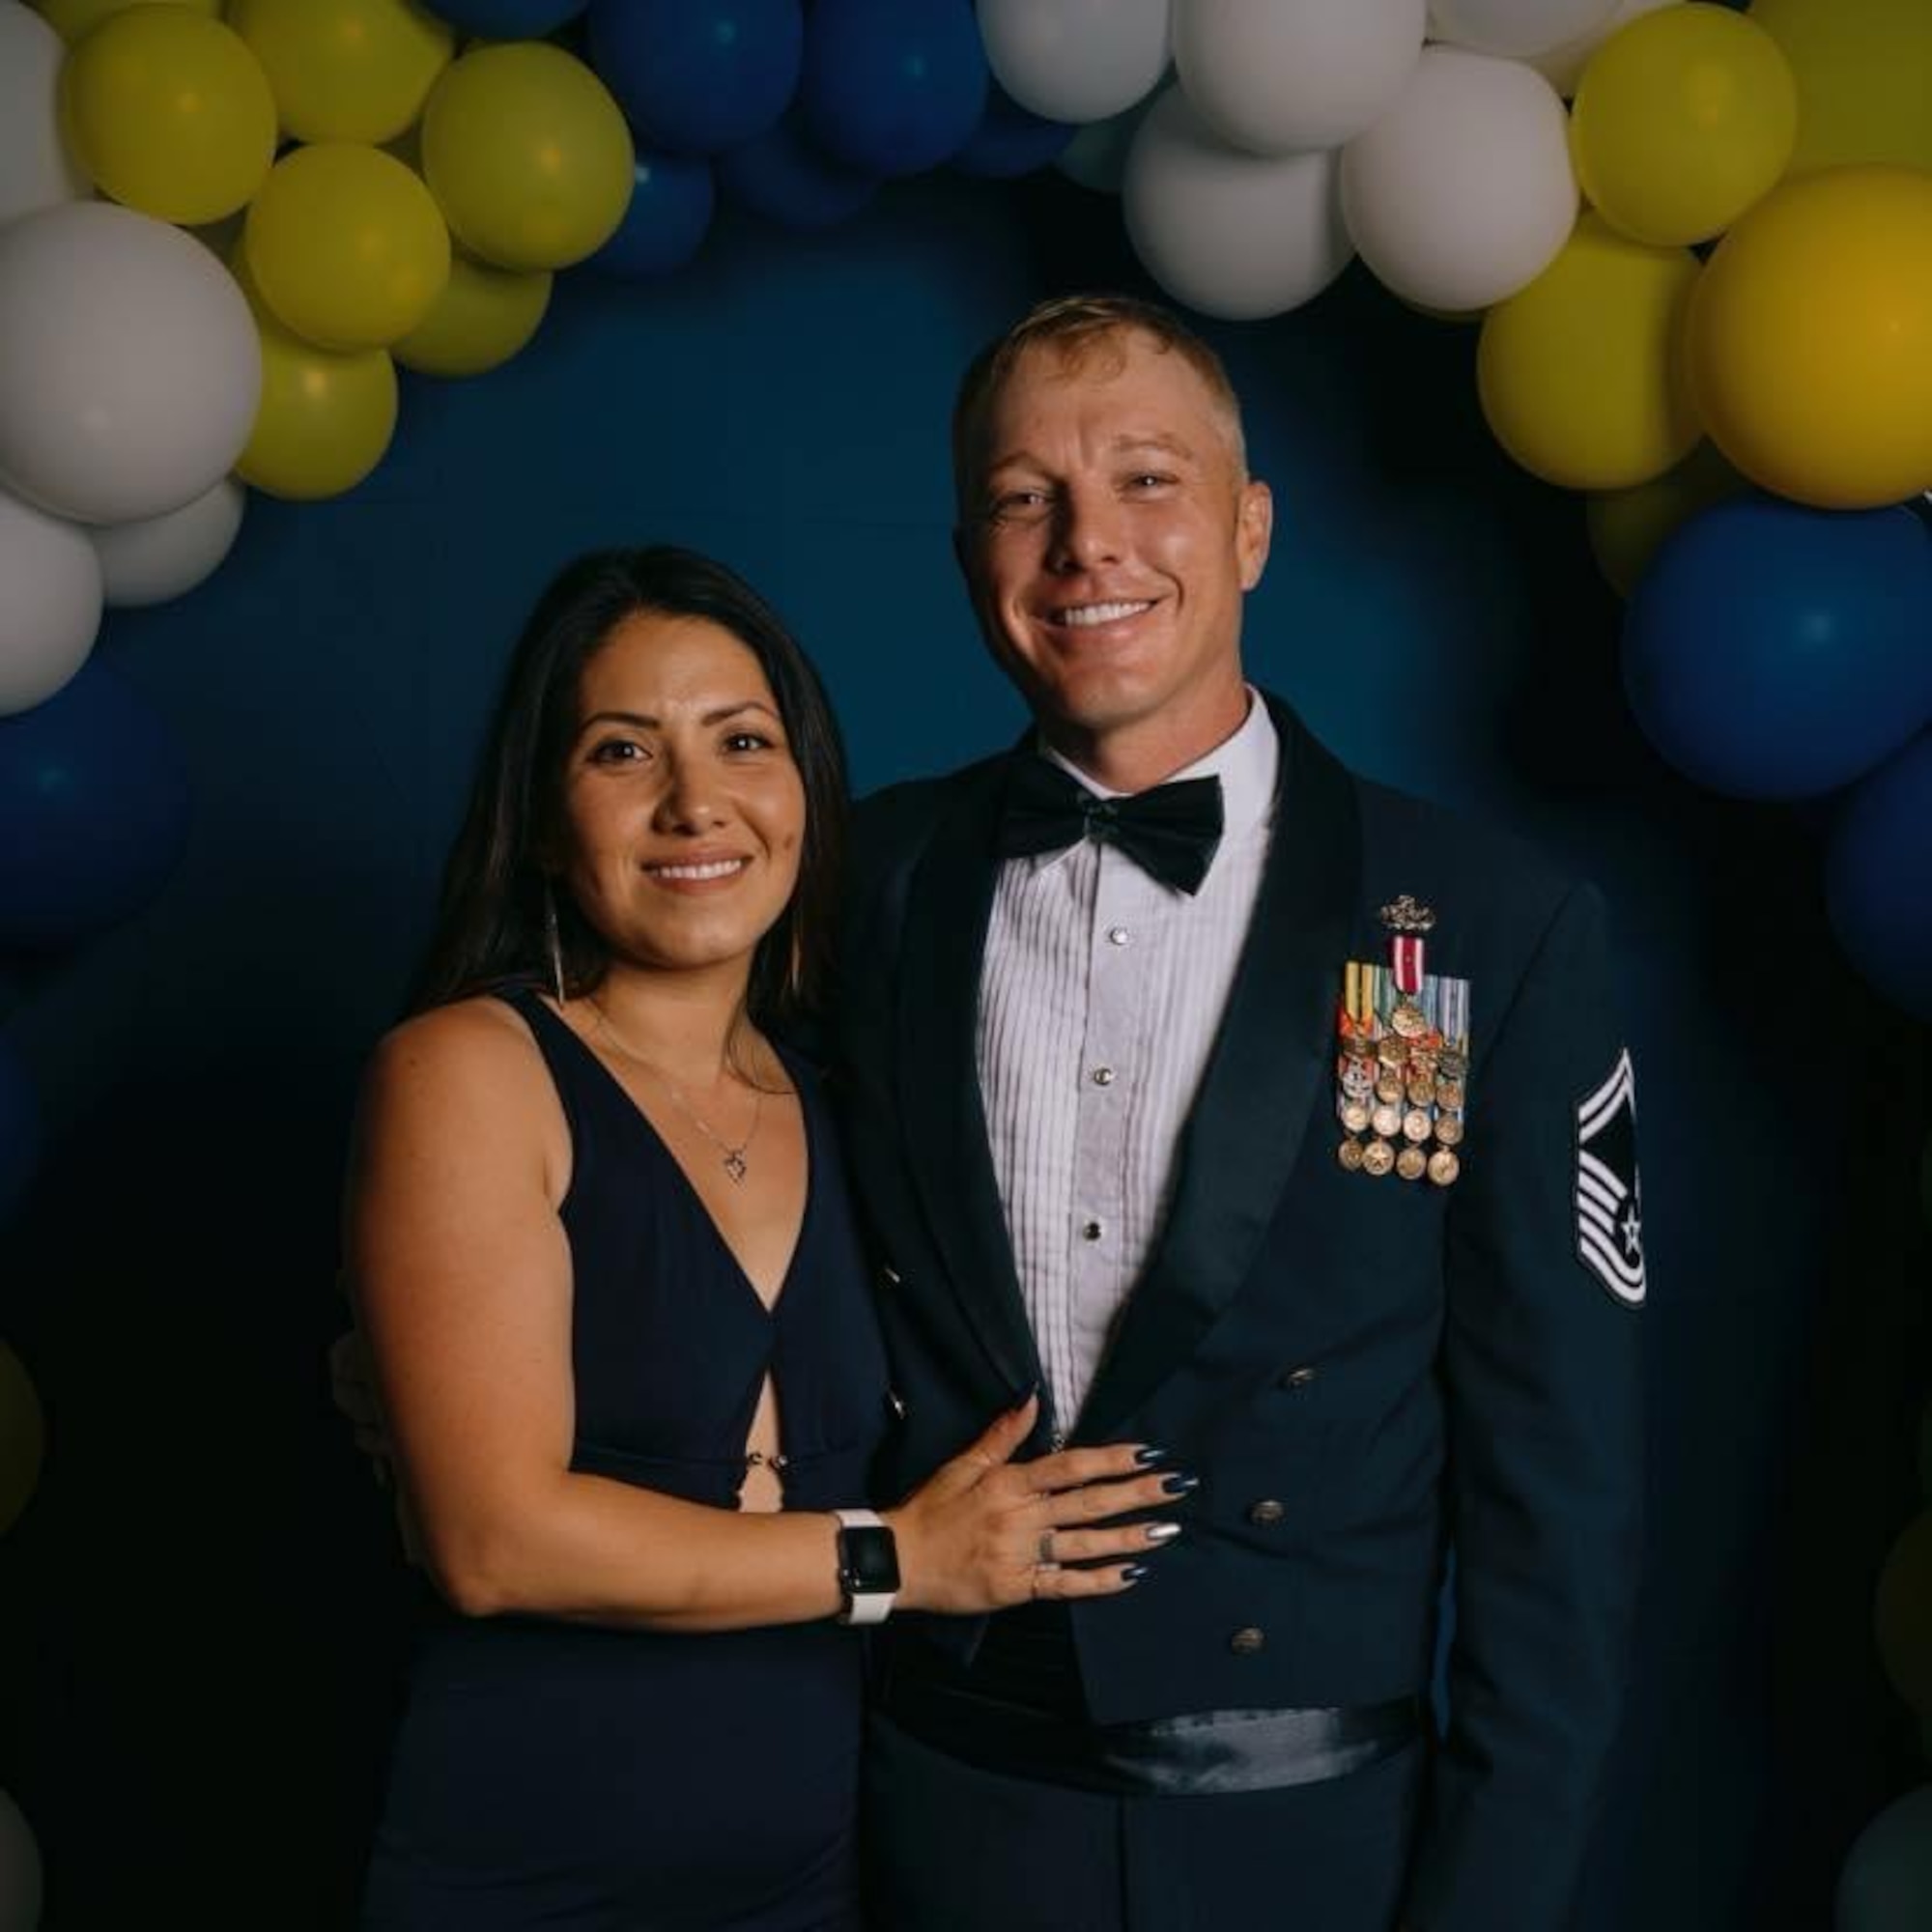 A couple in military service dress smiles for a photo